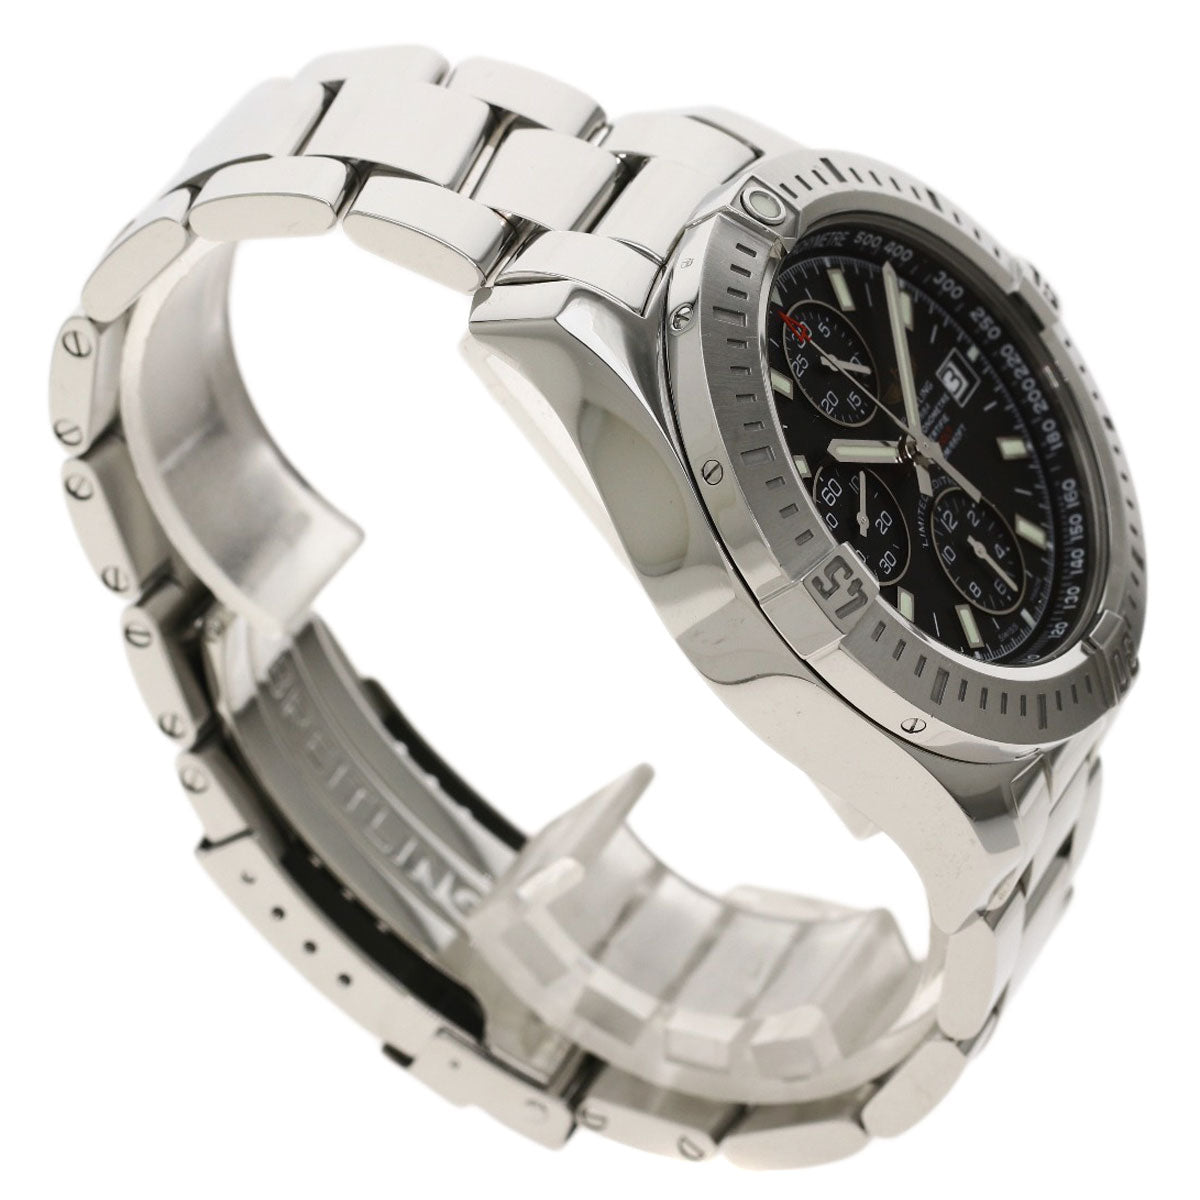 Breitling A13388 Colt Chronograph Japan Limited Stainless Steel Men's Watch - Japanese-Online-Store (JOS)